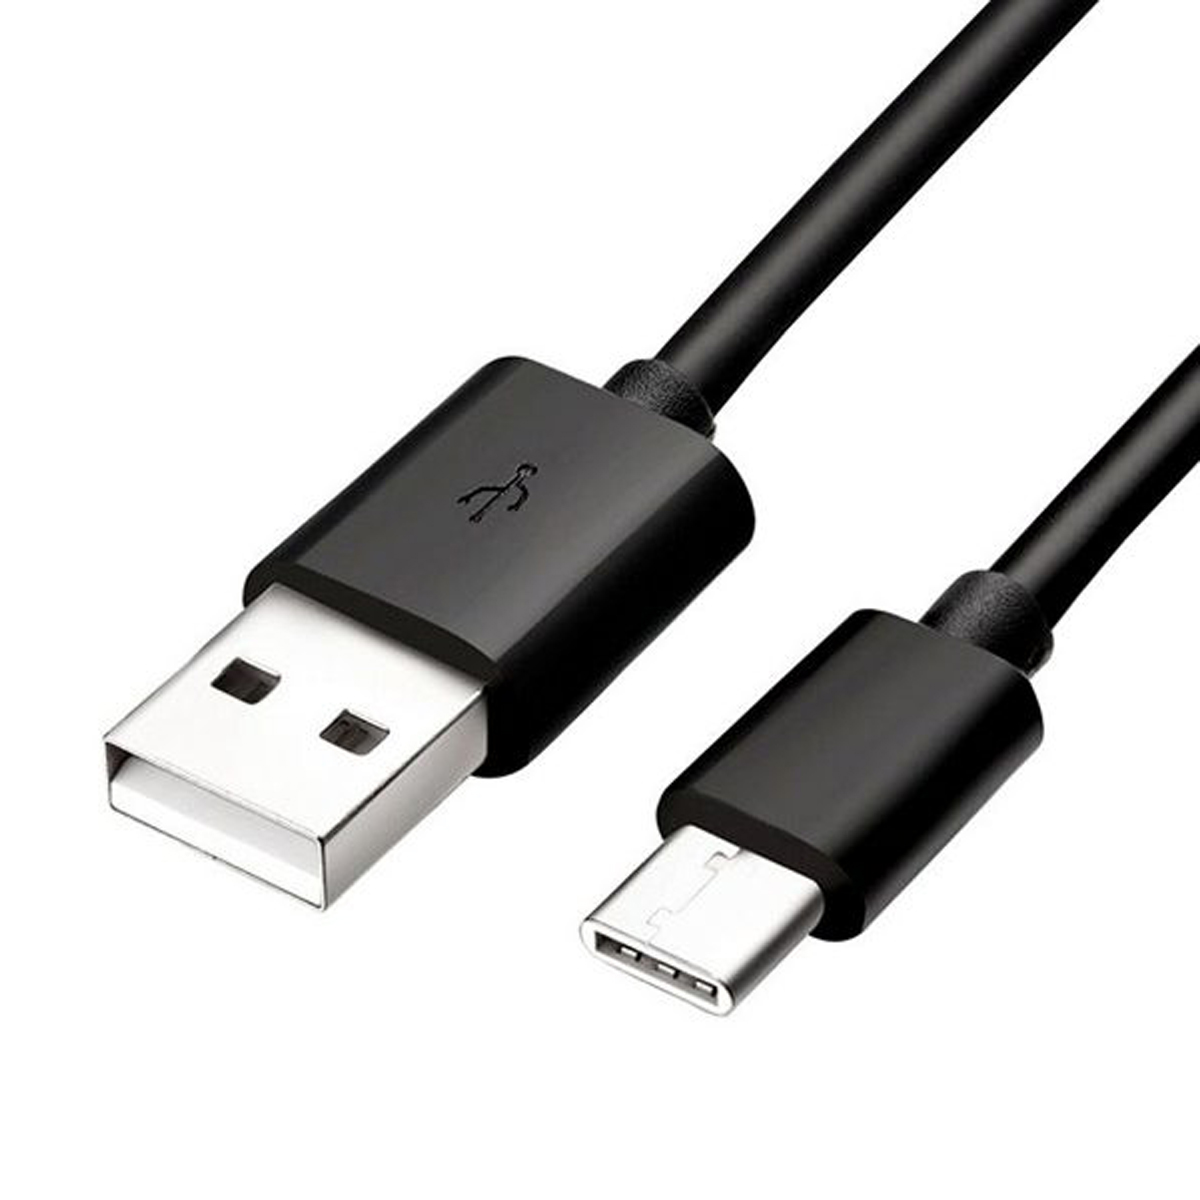 https://www.fatboy.com/assets/image/000/009/380/Fatboy-USB-cable-C-type_02_102225.jpg